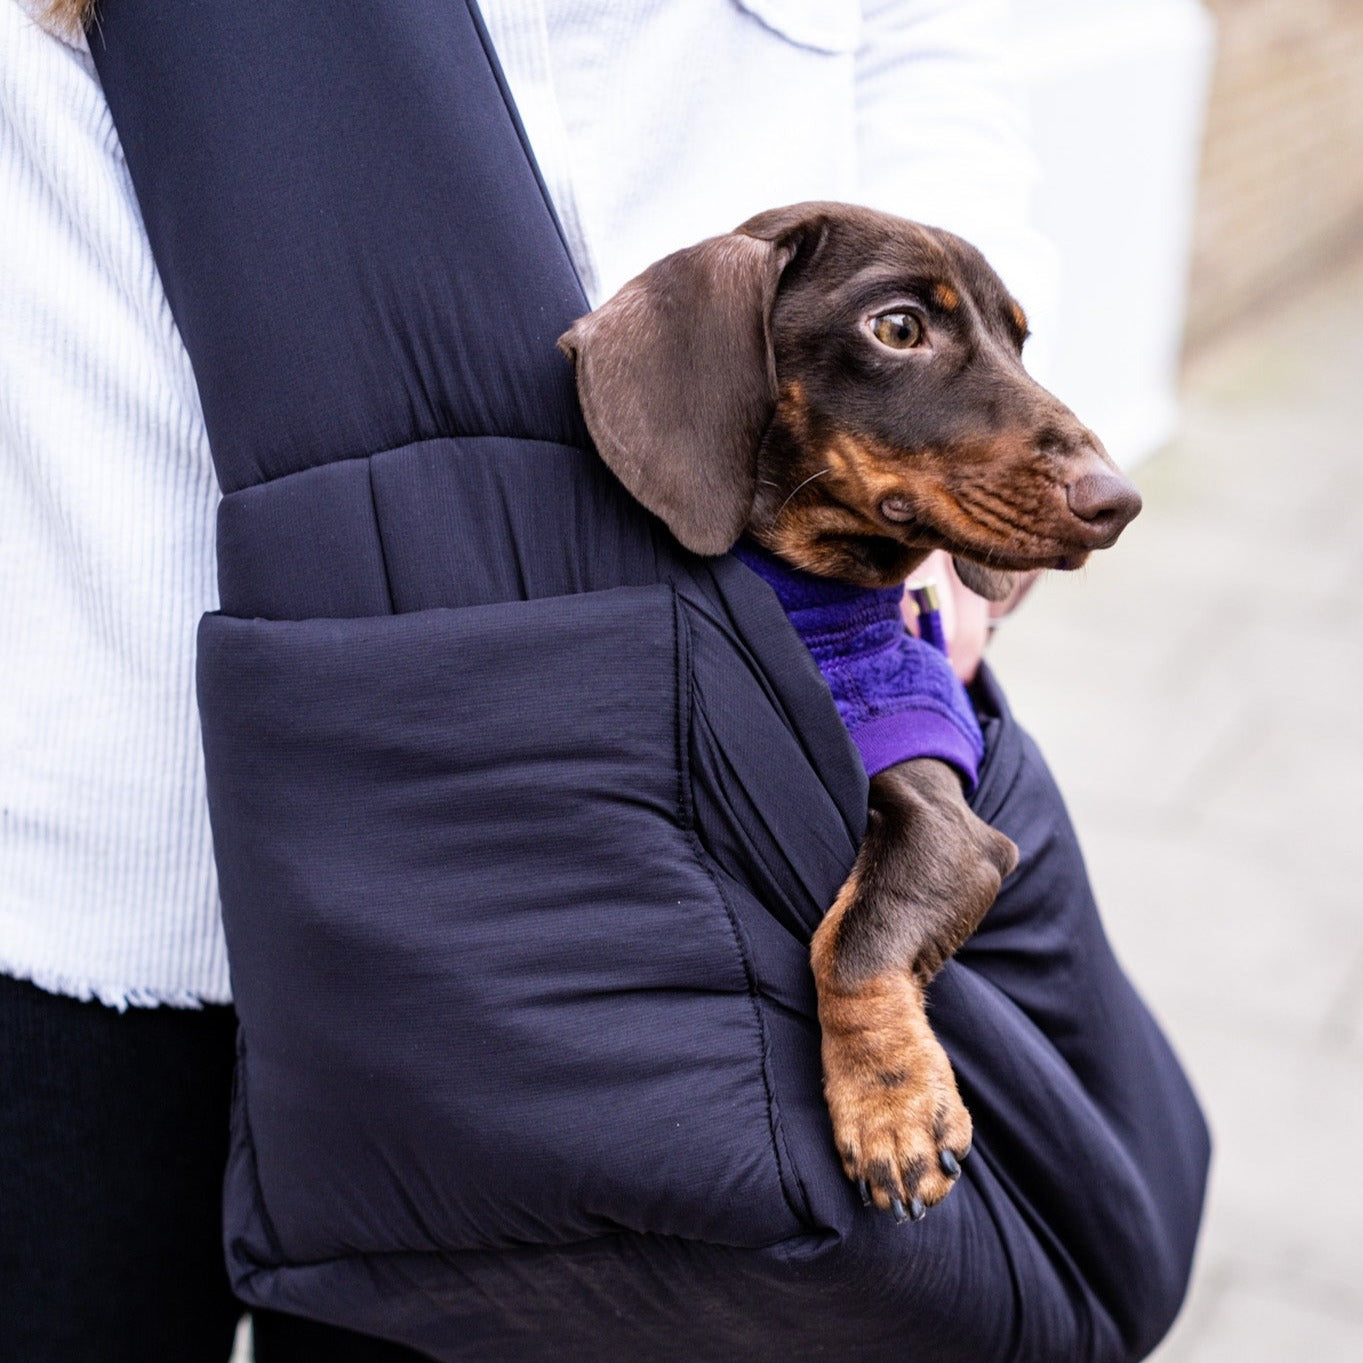 A dachshund being carried in the Air Black carrier.